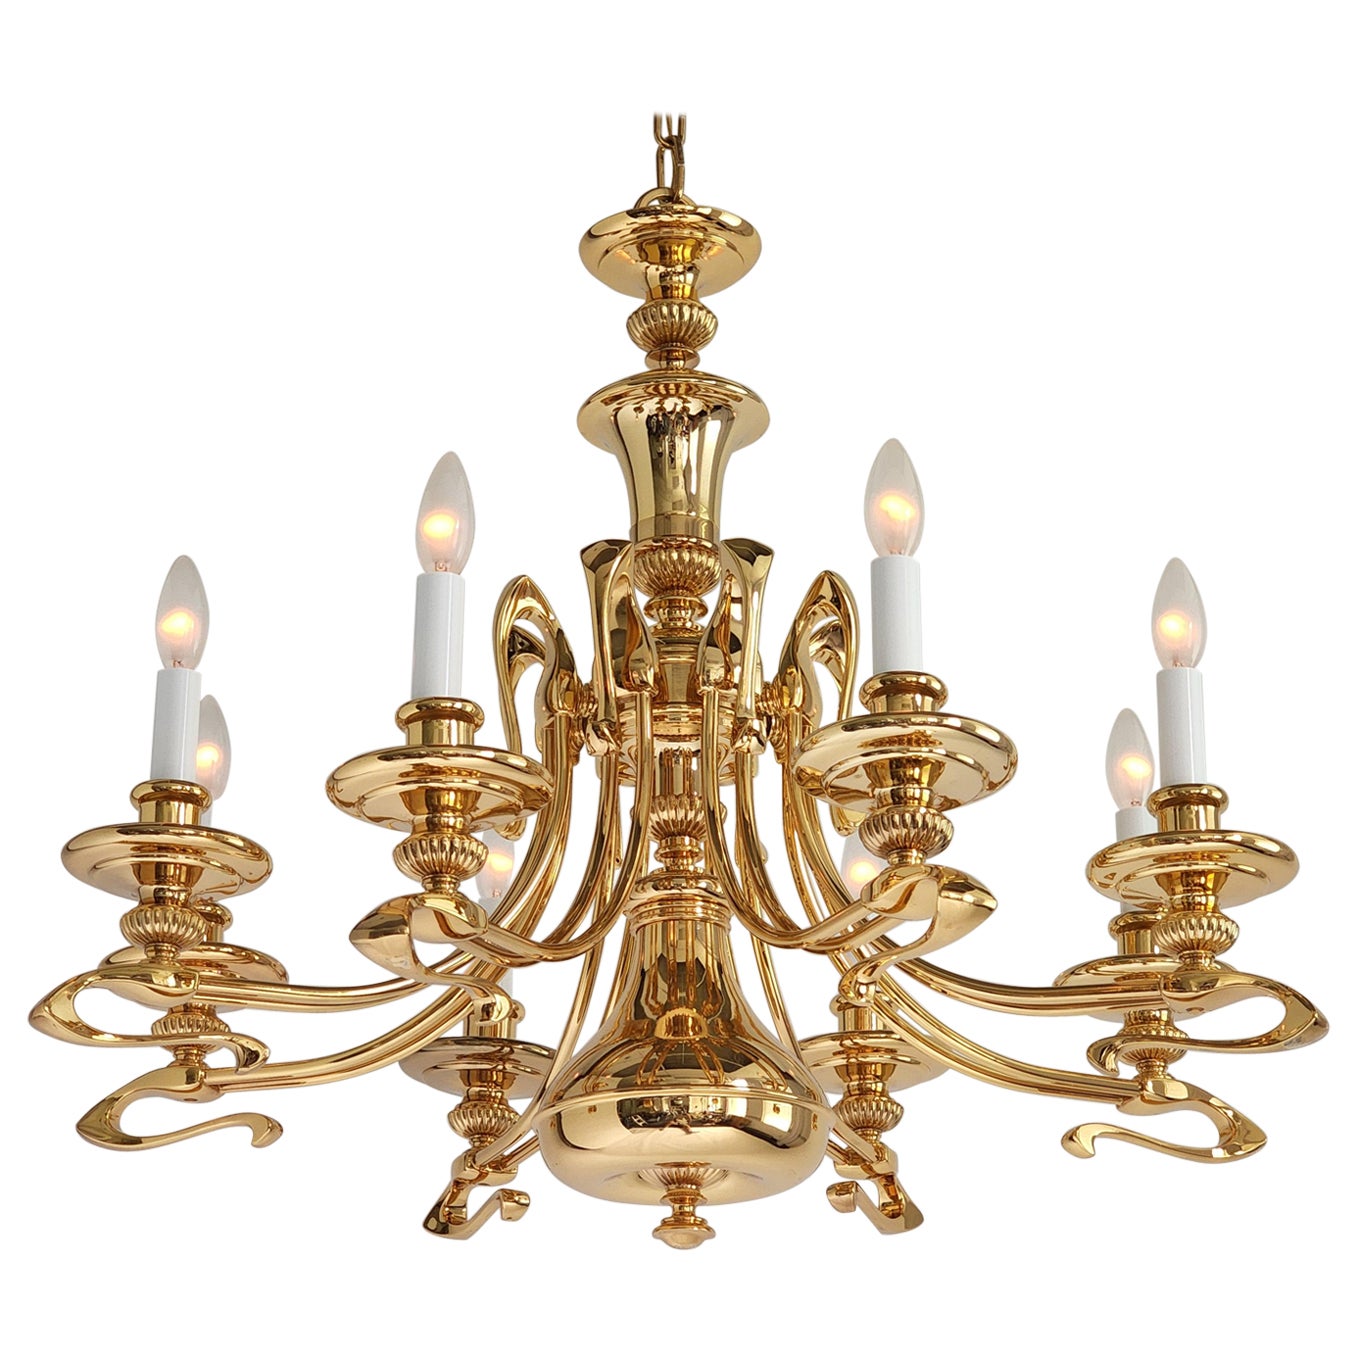 1980s Massive Art Nouveau Style Gold Plated Chandelier, Italy For Sale